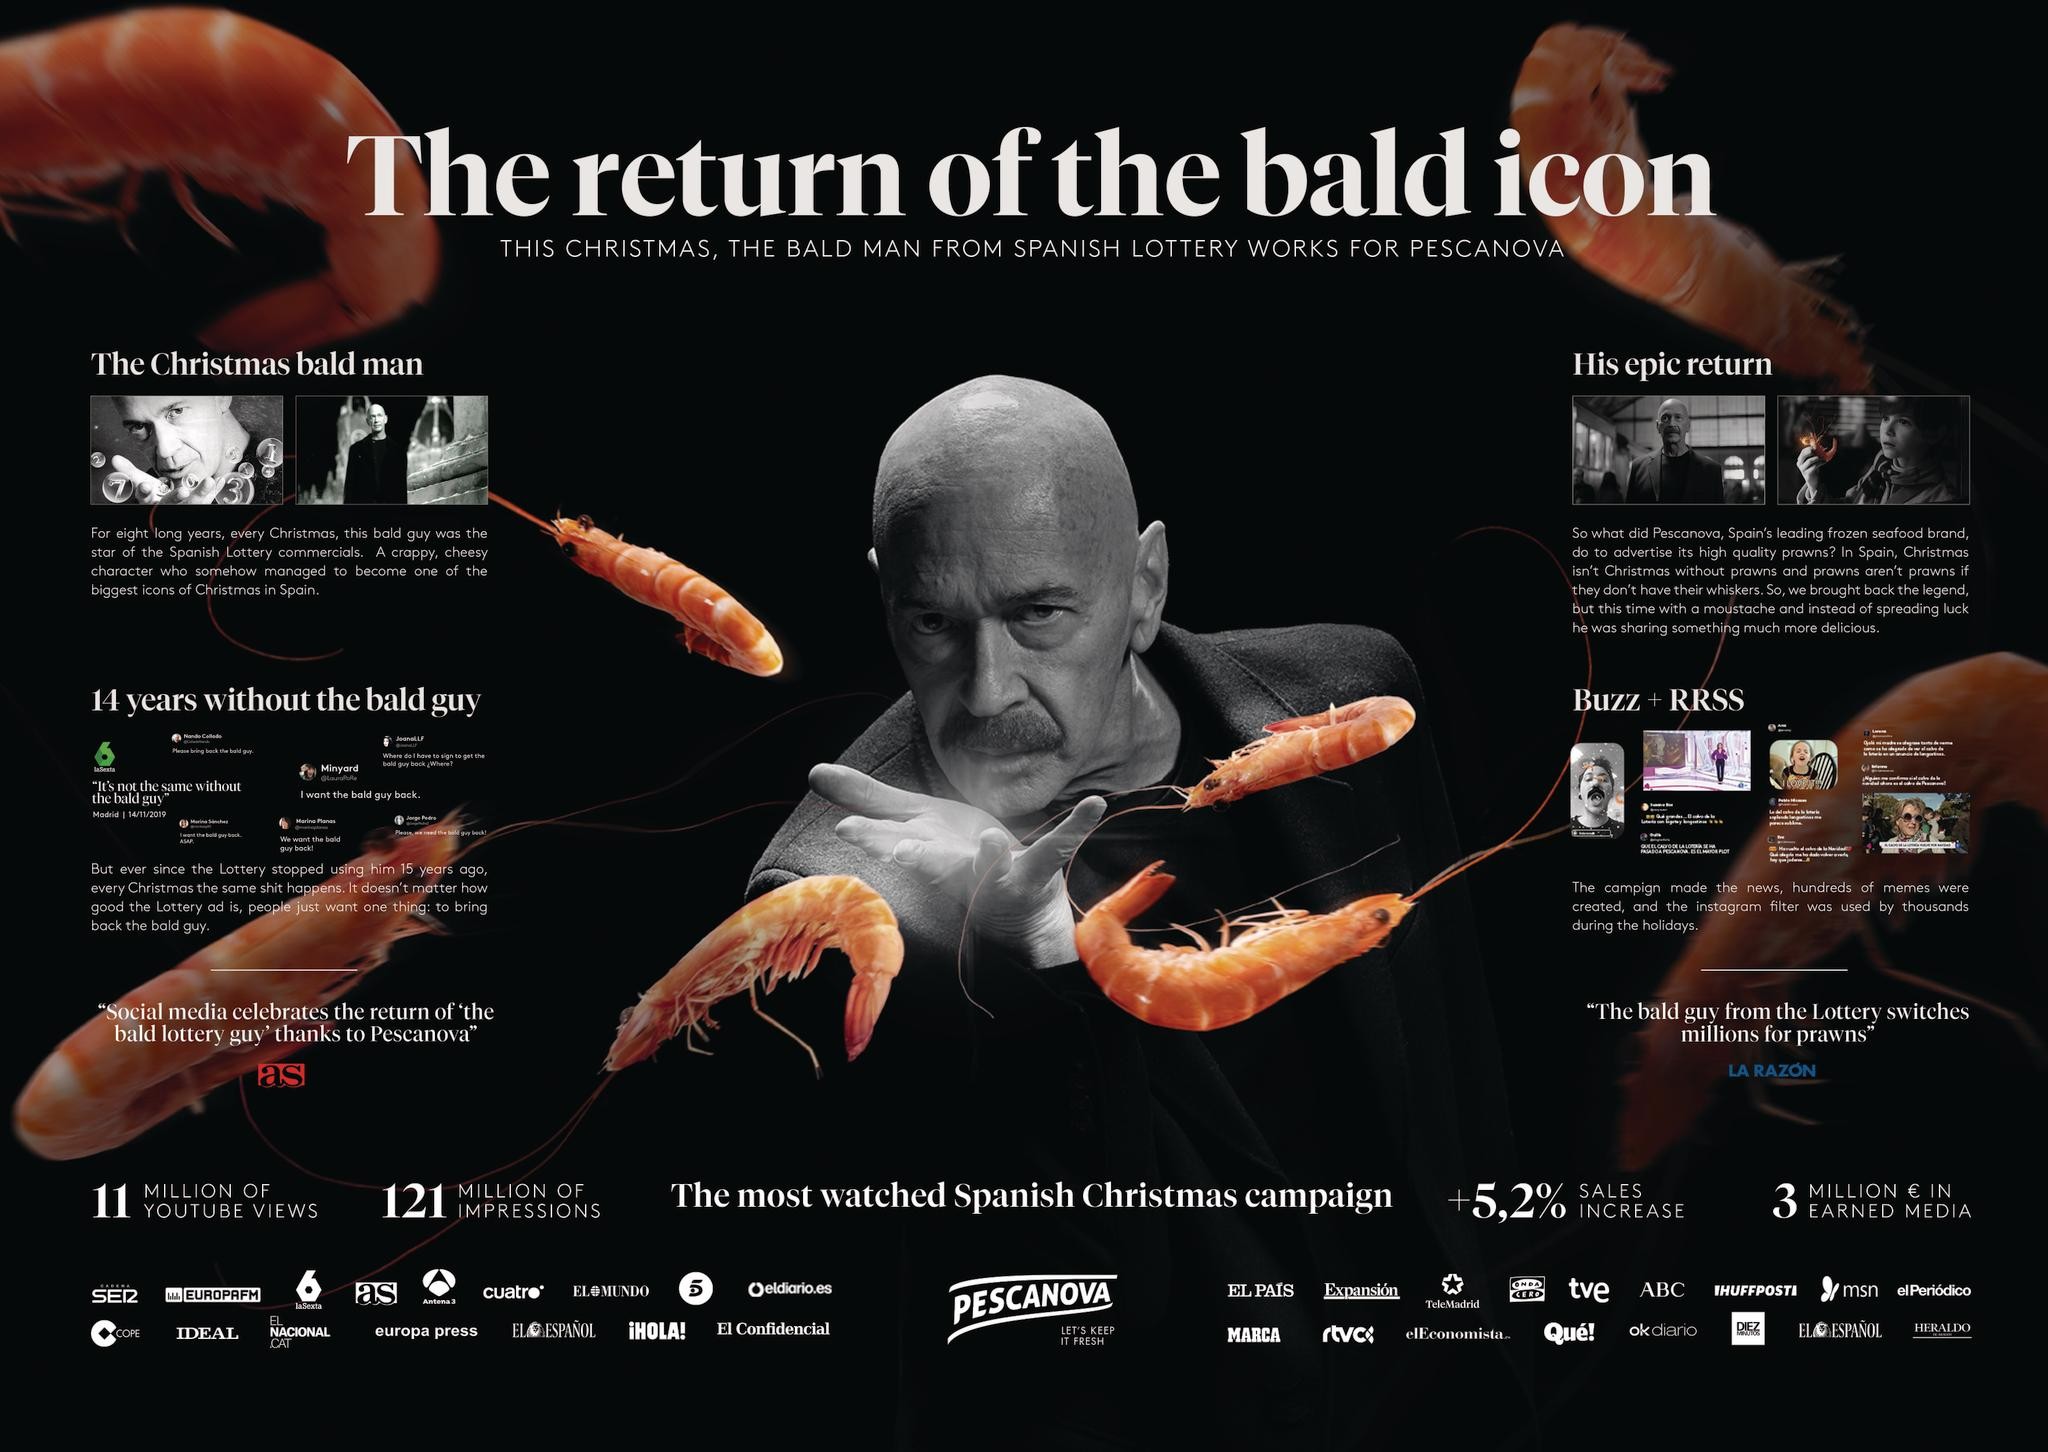 The Return of the Bald Icon